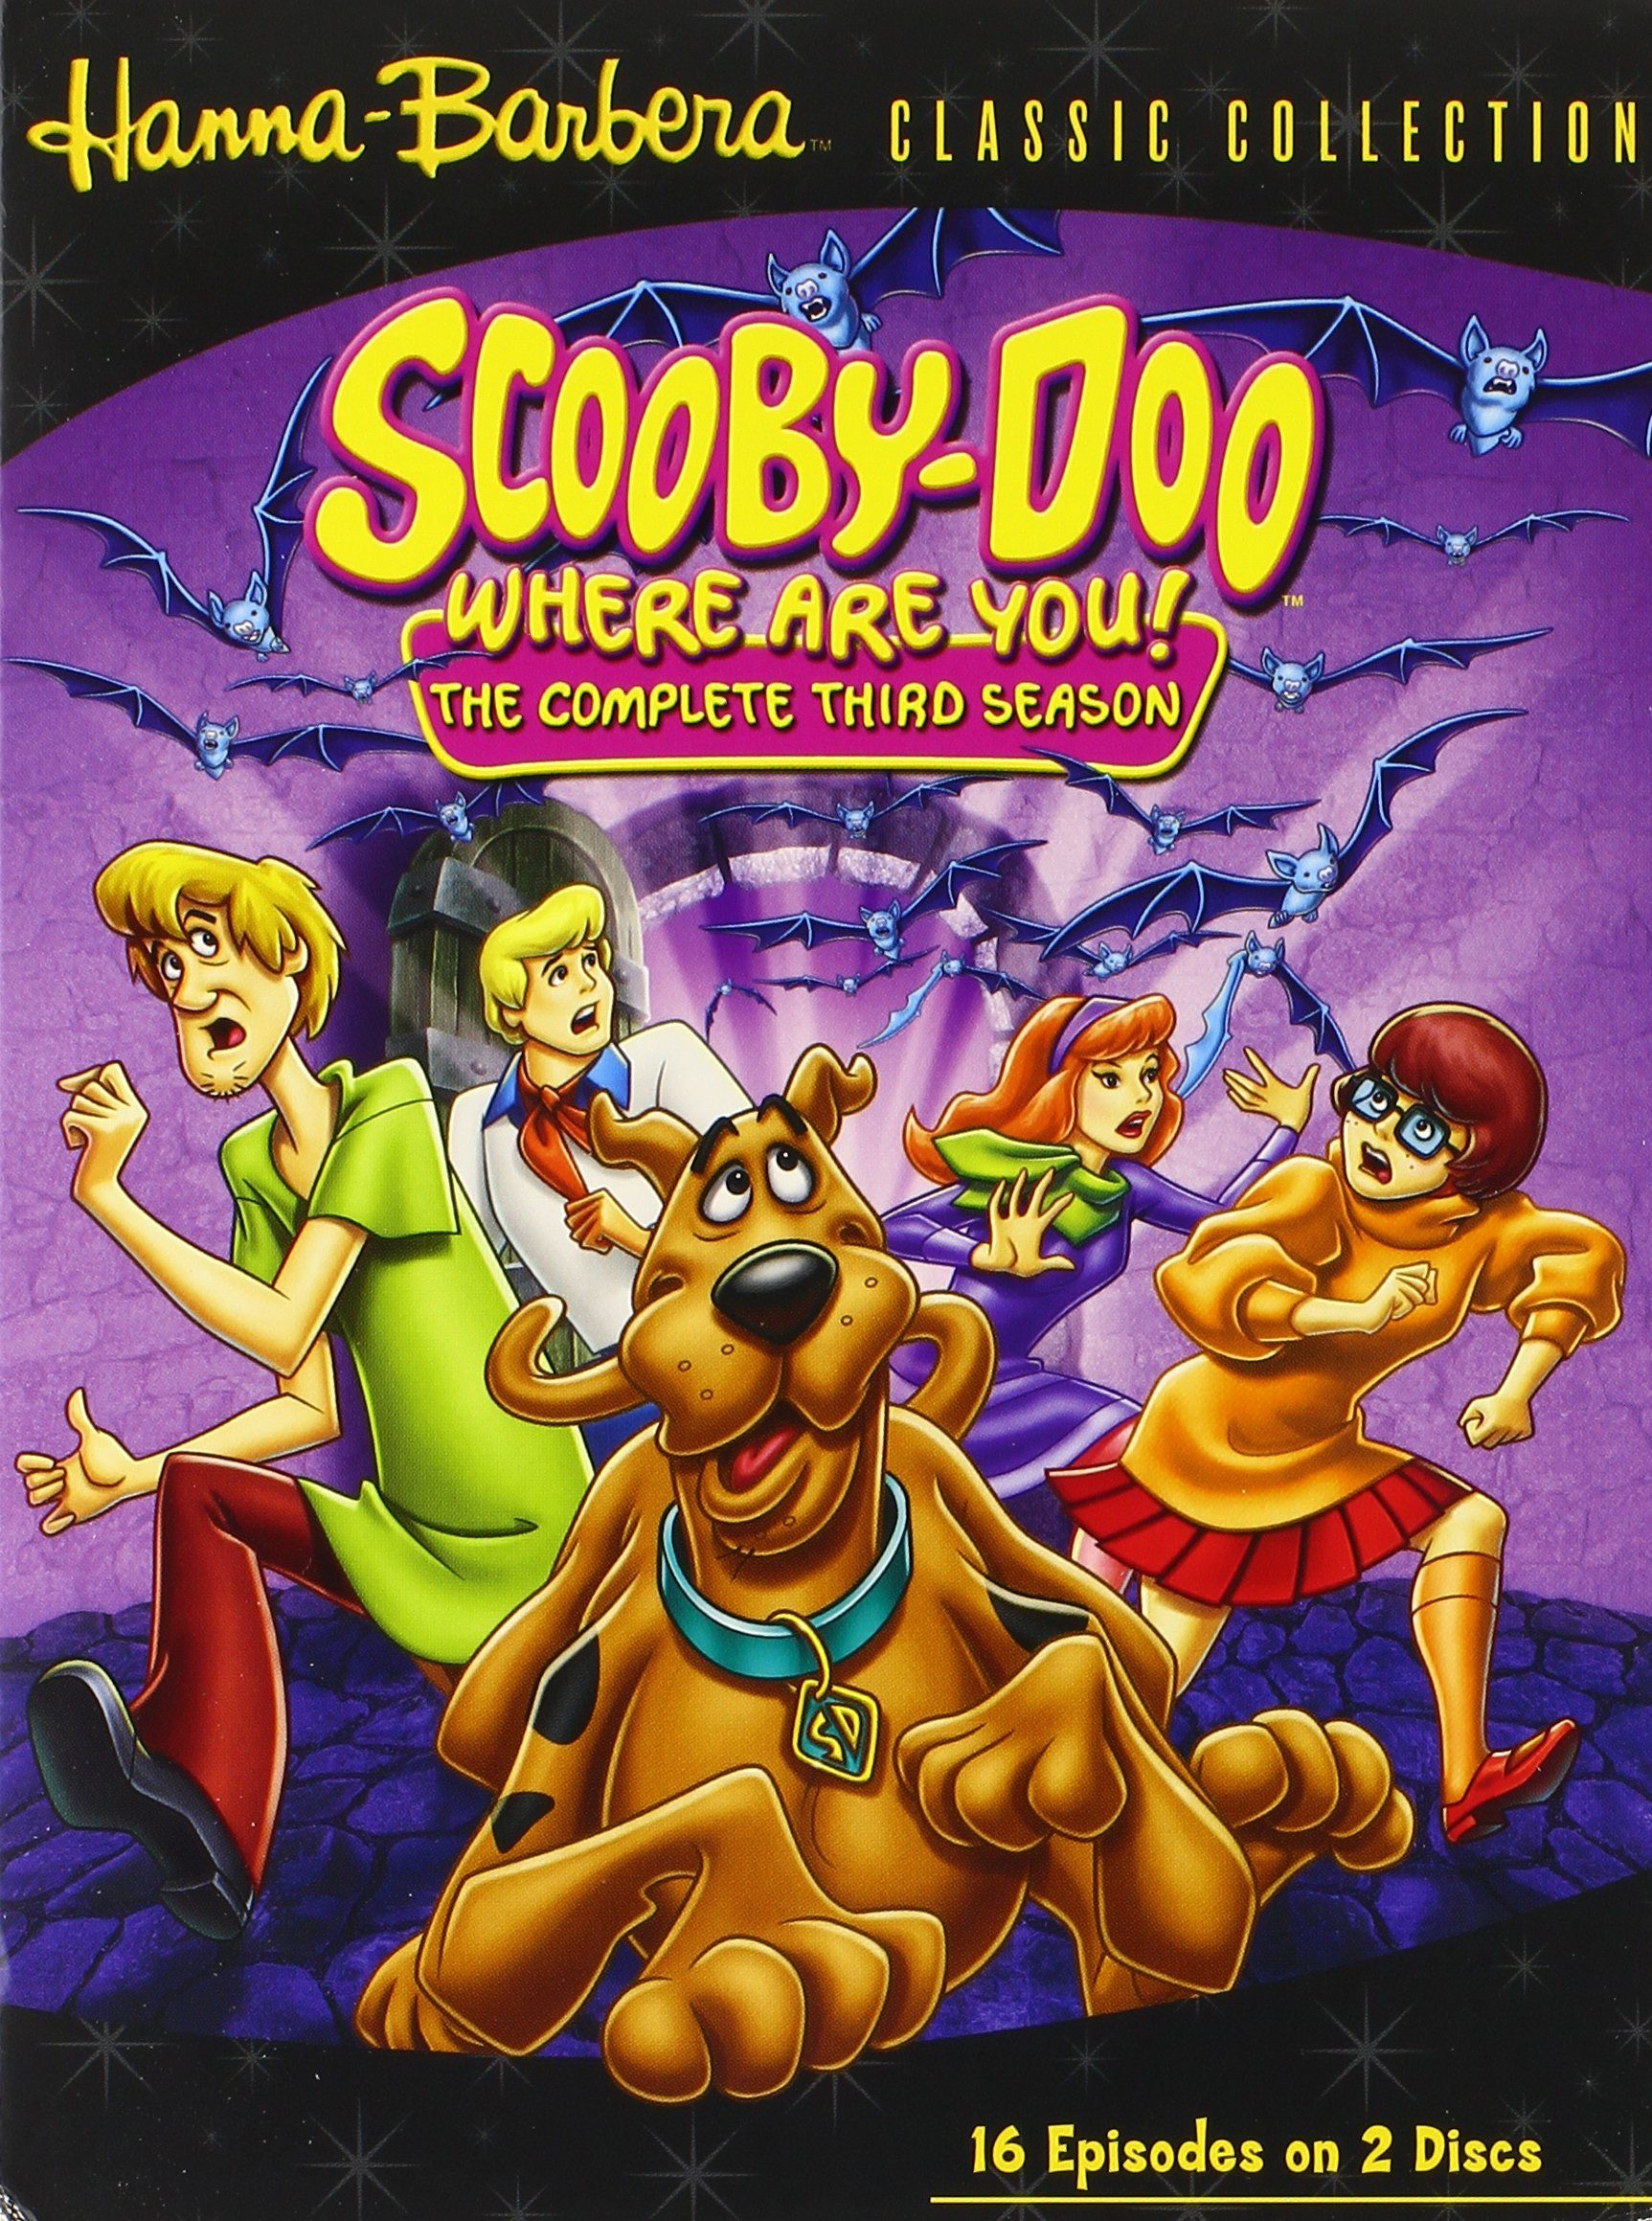 Scooby Doo Where Are You 54th Anniversary 1969-2023 House Flags